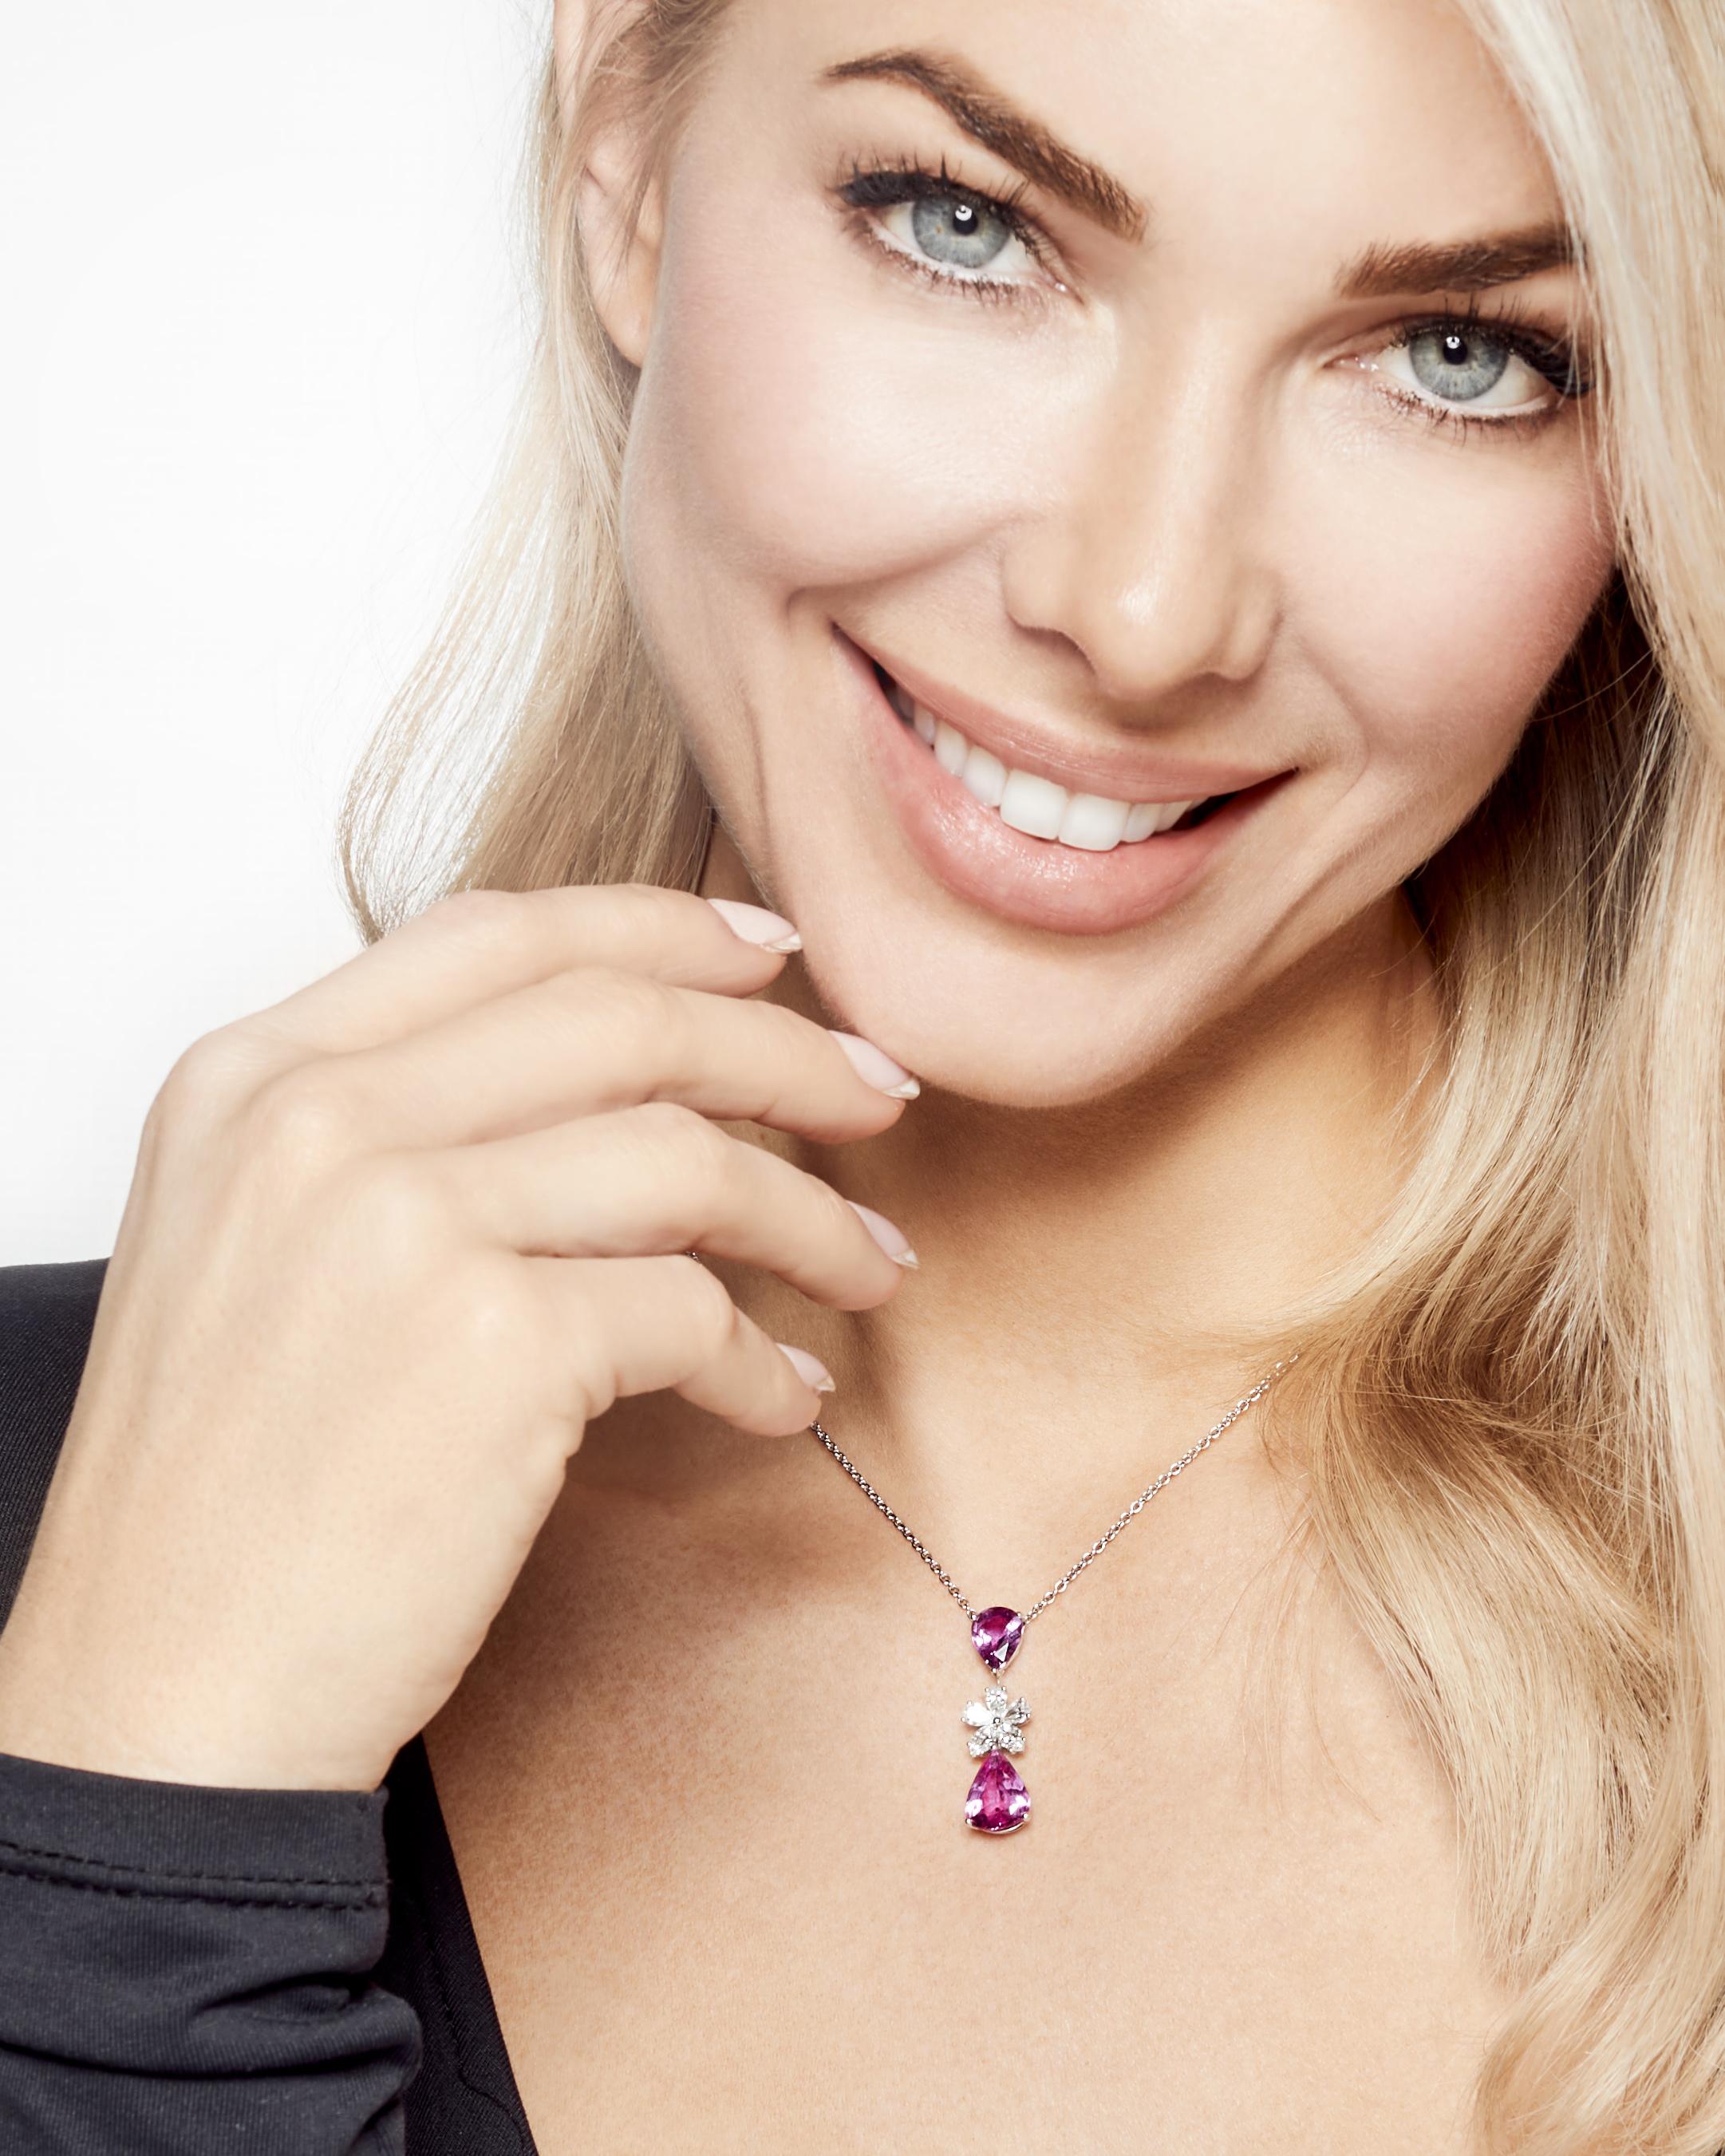 Graff Pink Pearshape Sapphire Pendant With Pear and Marquise White Diamond Flower Motif

Please contact us for more information. 

*To keep your jewelry in excellent condition, avoid all exposure to moisture, perfume, lotions and